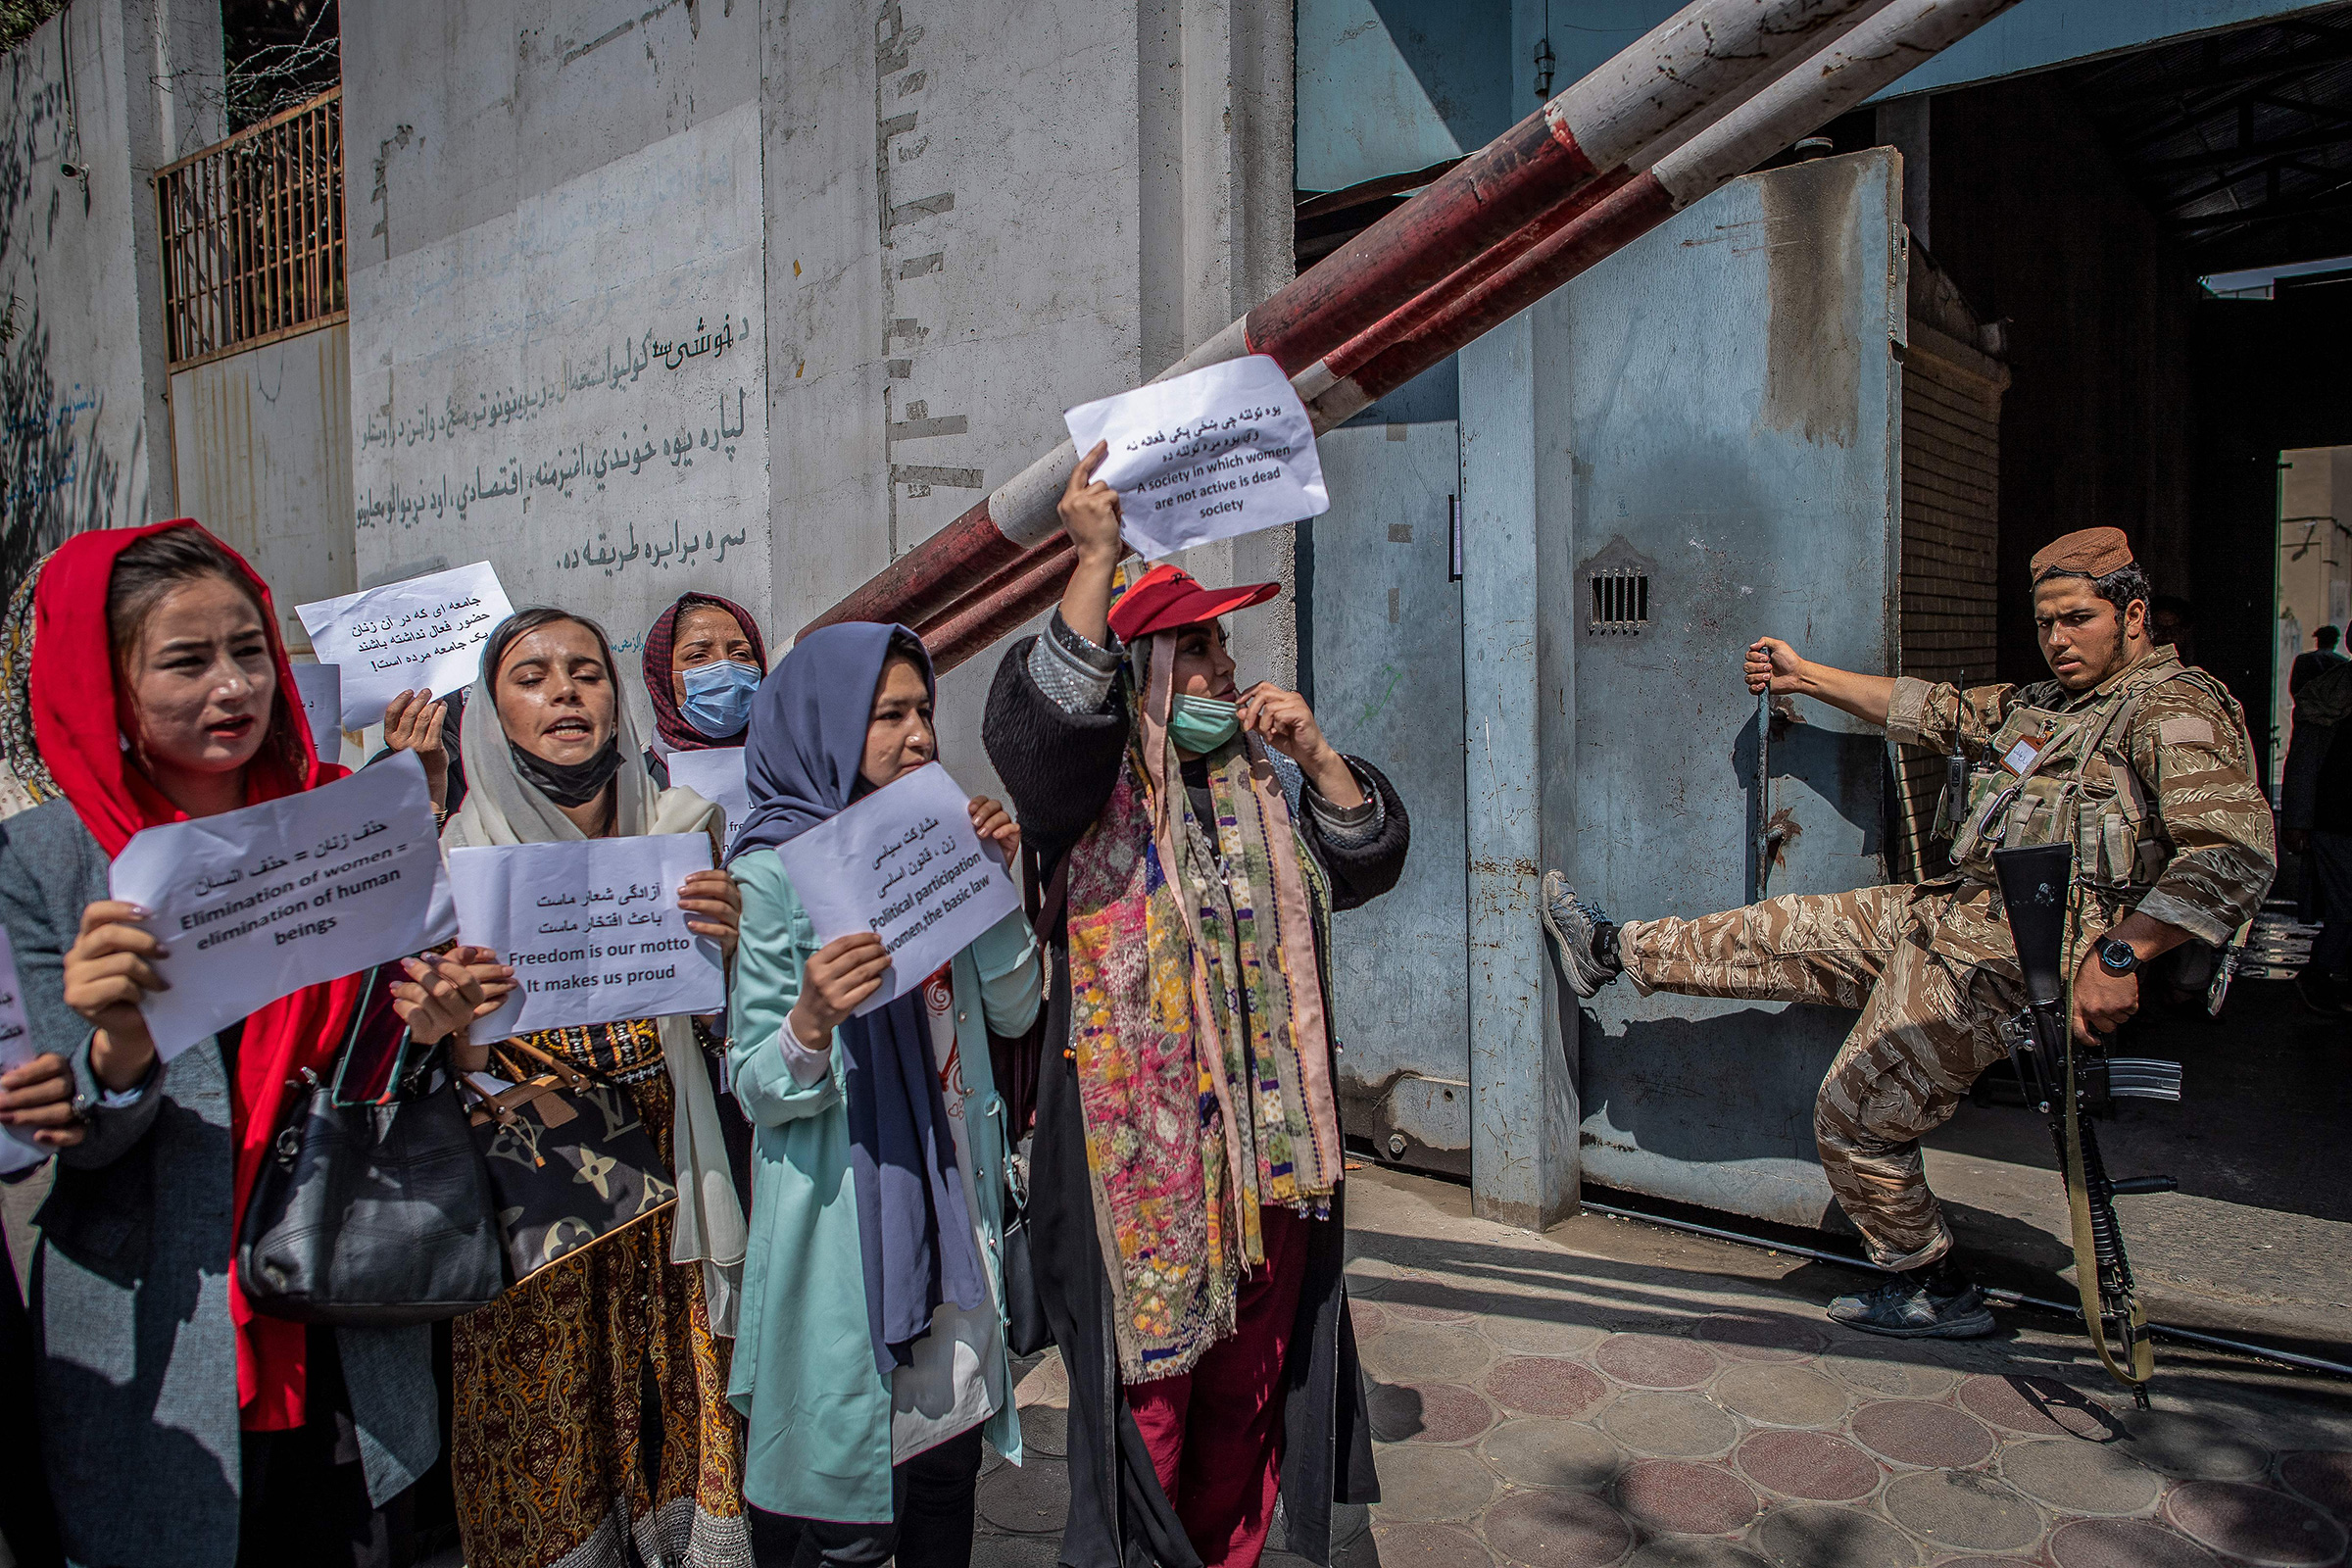 A Taliban fighter watches as Afghan women hold placards during a demonstration demanding better rights for women in front of the former Ministry of Women Affairs in Kabul on Sept. 19, 2021. (Bulent Kilic—AFP/Getty Images)